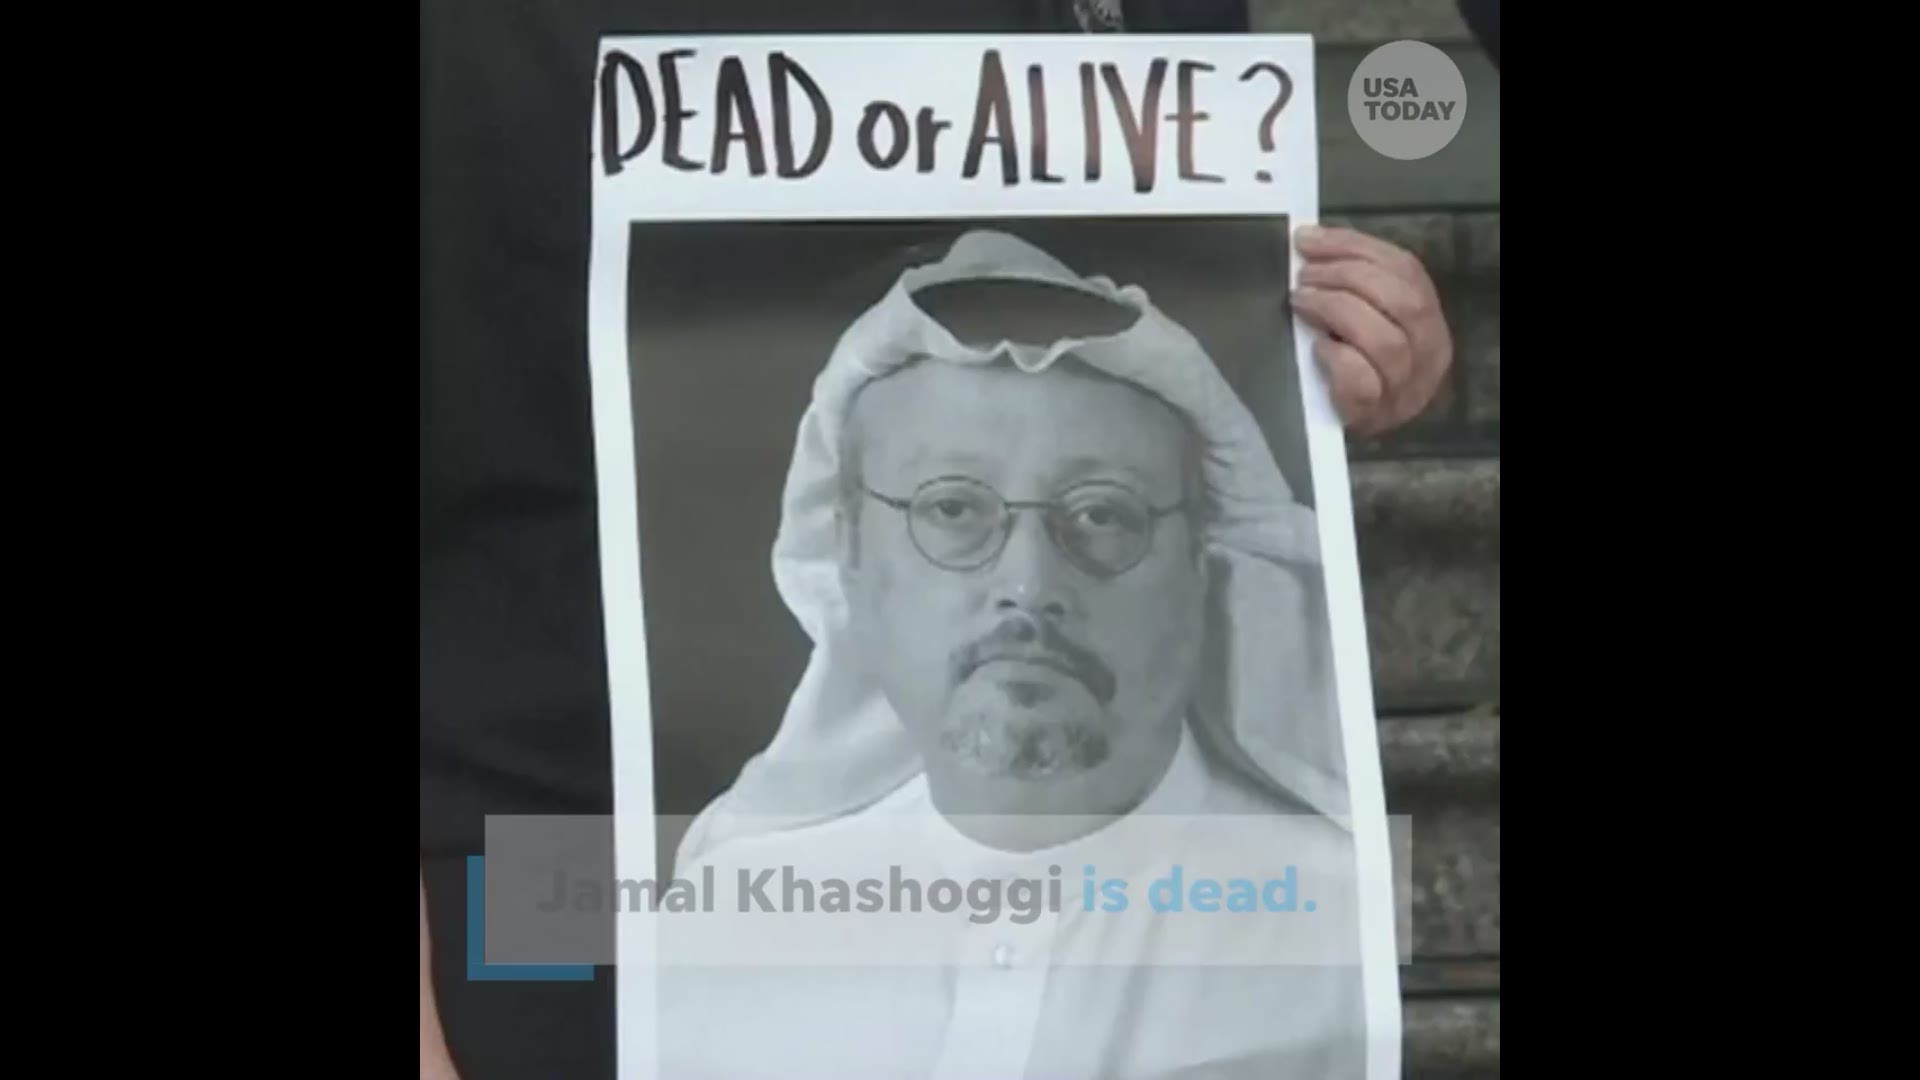 The president has vowed \u0022very severe\u0022 consequences if the Saudi government is found responsible for the murder of Jamal Khashoggi. He was last seen entering the Saudi consulate in Istanbul. (USA TODAY)